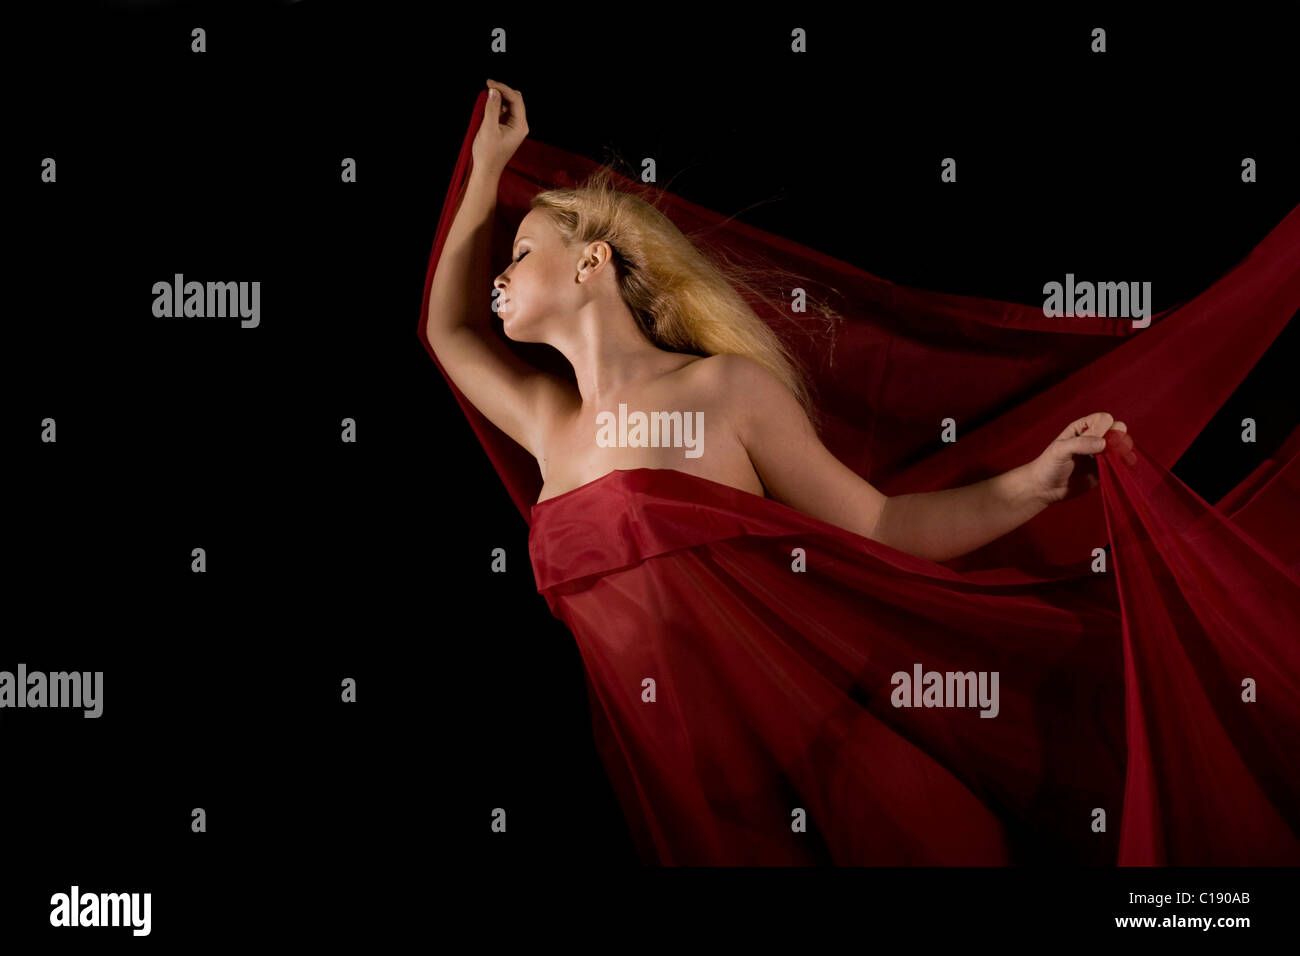 Young blonde woman wrapped in red cloth in front of a black backdrop Stock Photo